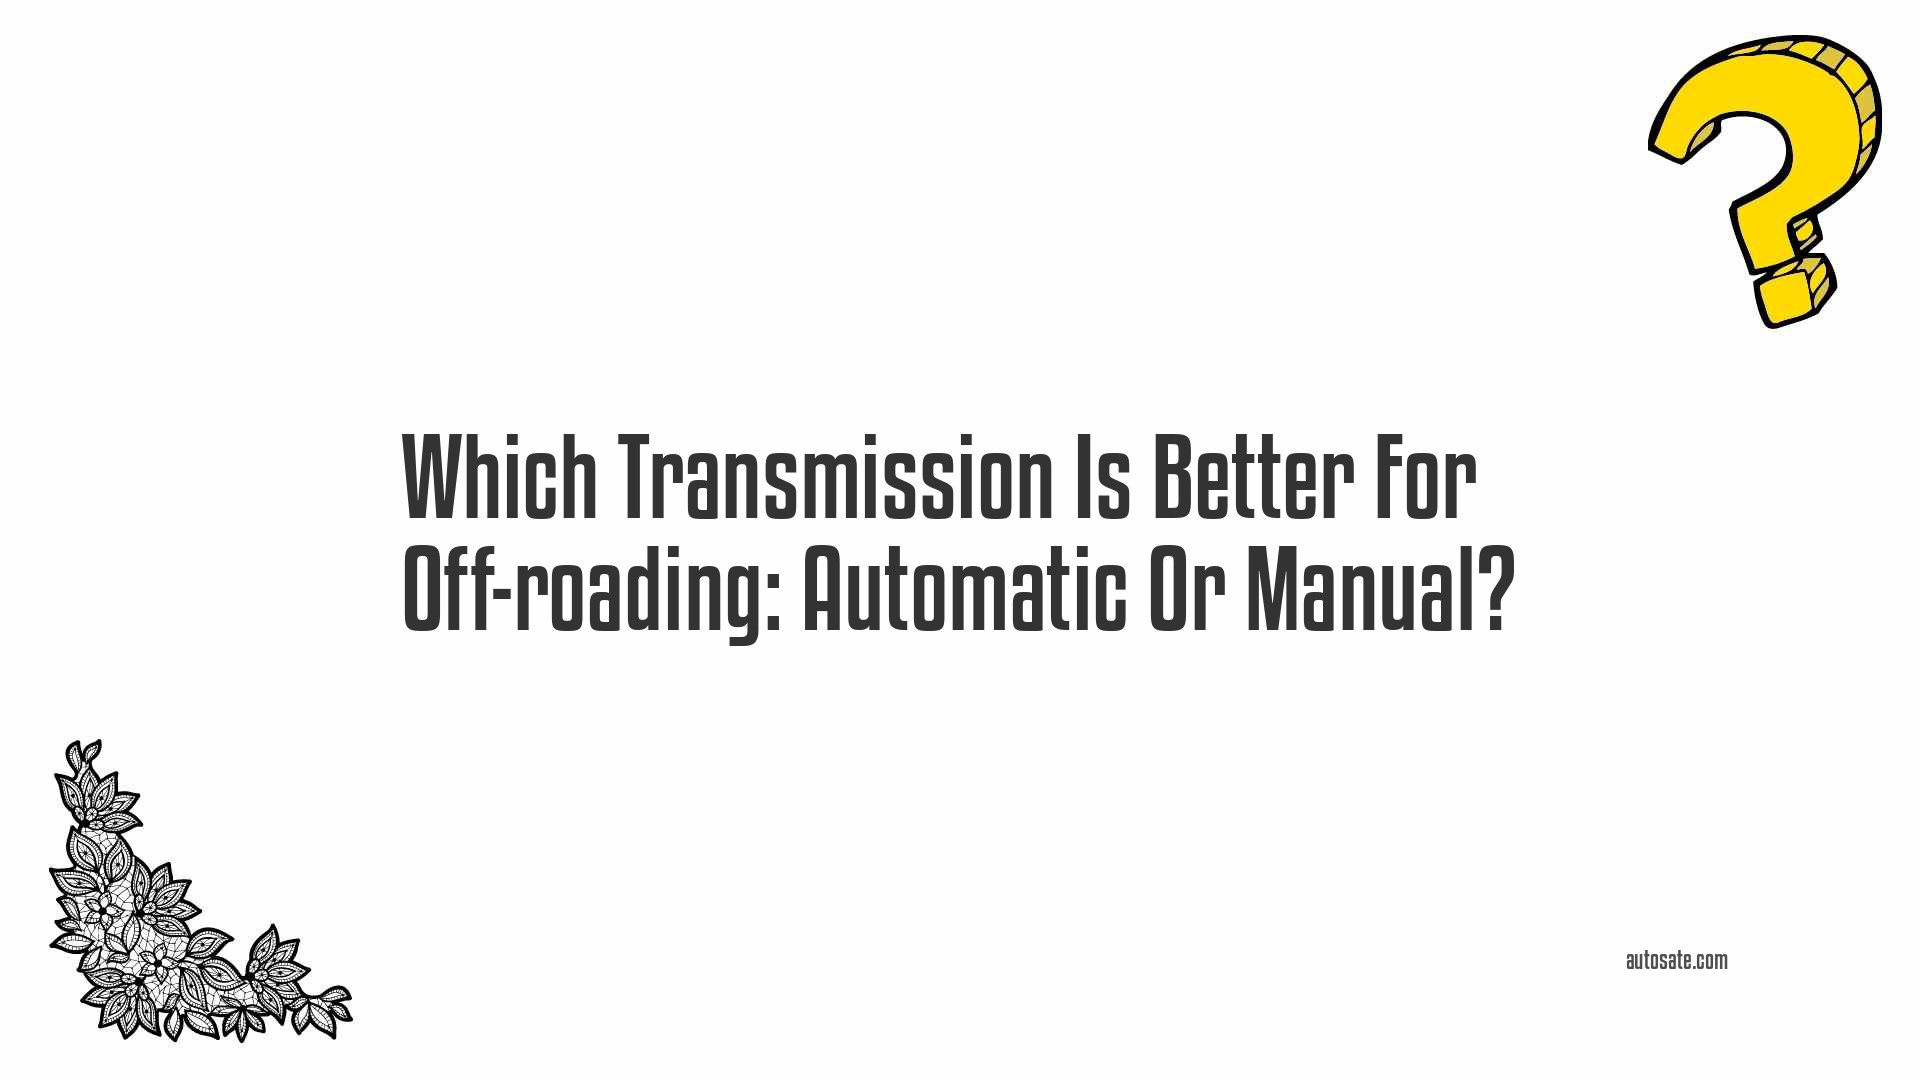 Which Transmission Is Better For Off-roading: Automatic Or Manual?